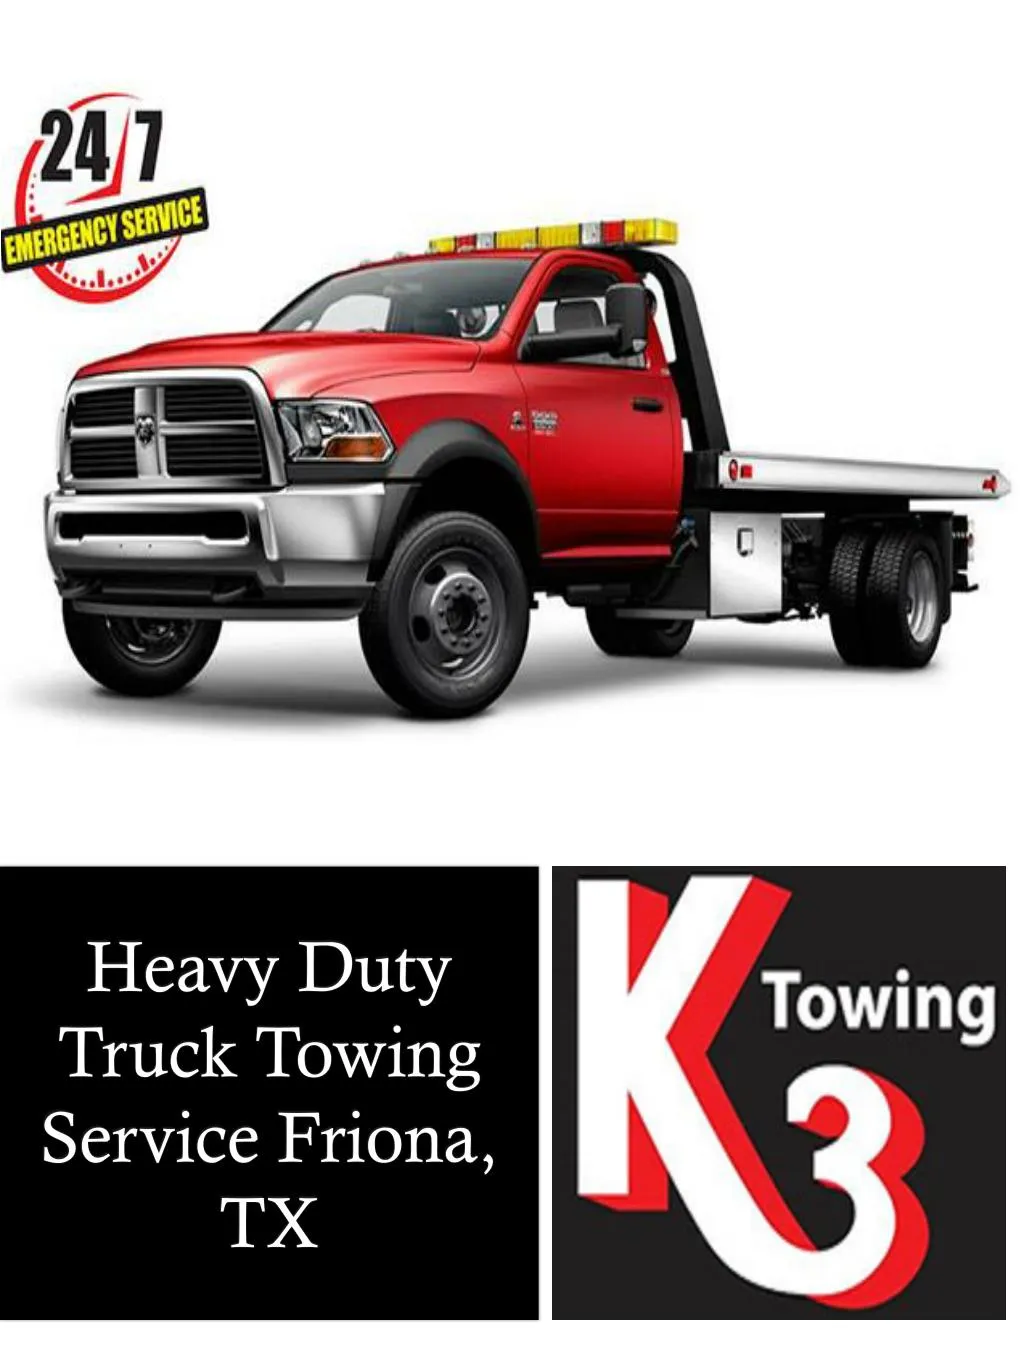 heavy duty truck towing service friona tx